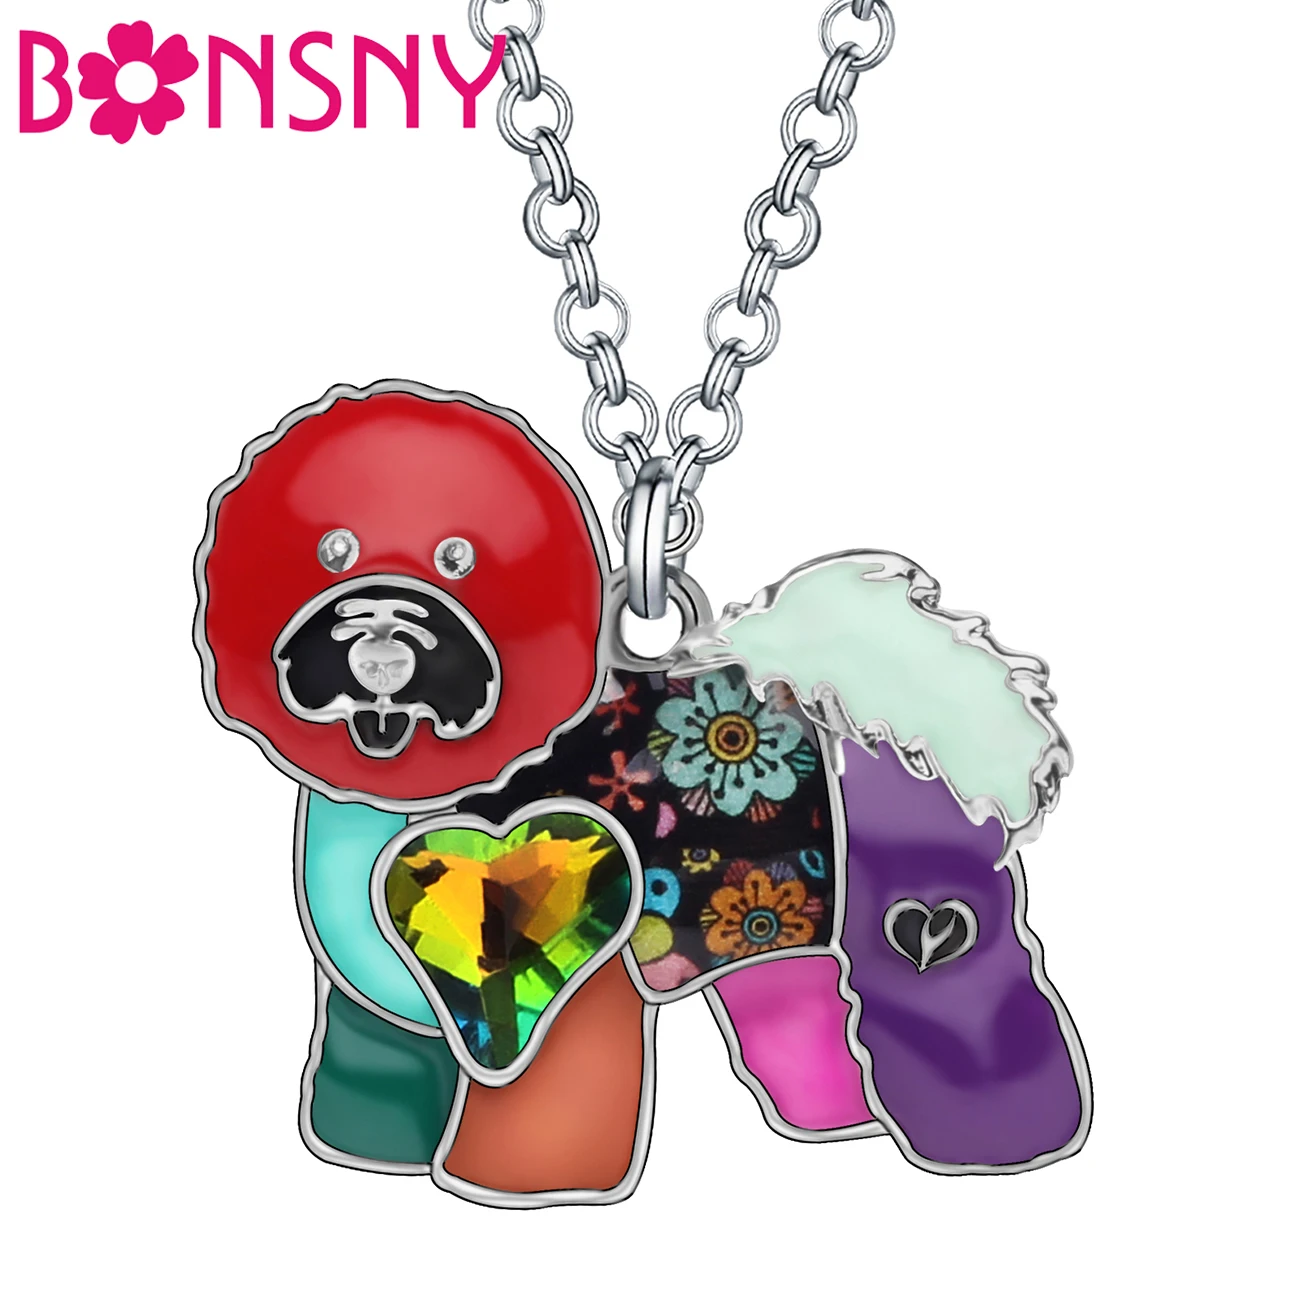 

BONSNY Rhinestone Crystal Enamel Alloy Floral Curly Hair Bichon Dogs Necklace Pendant Fashion Pets Jewelry For Women Girls Gifts